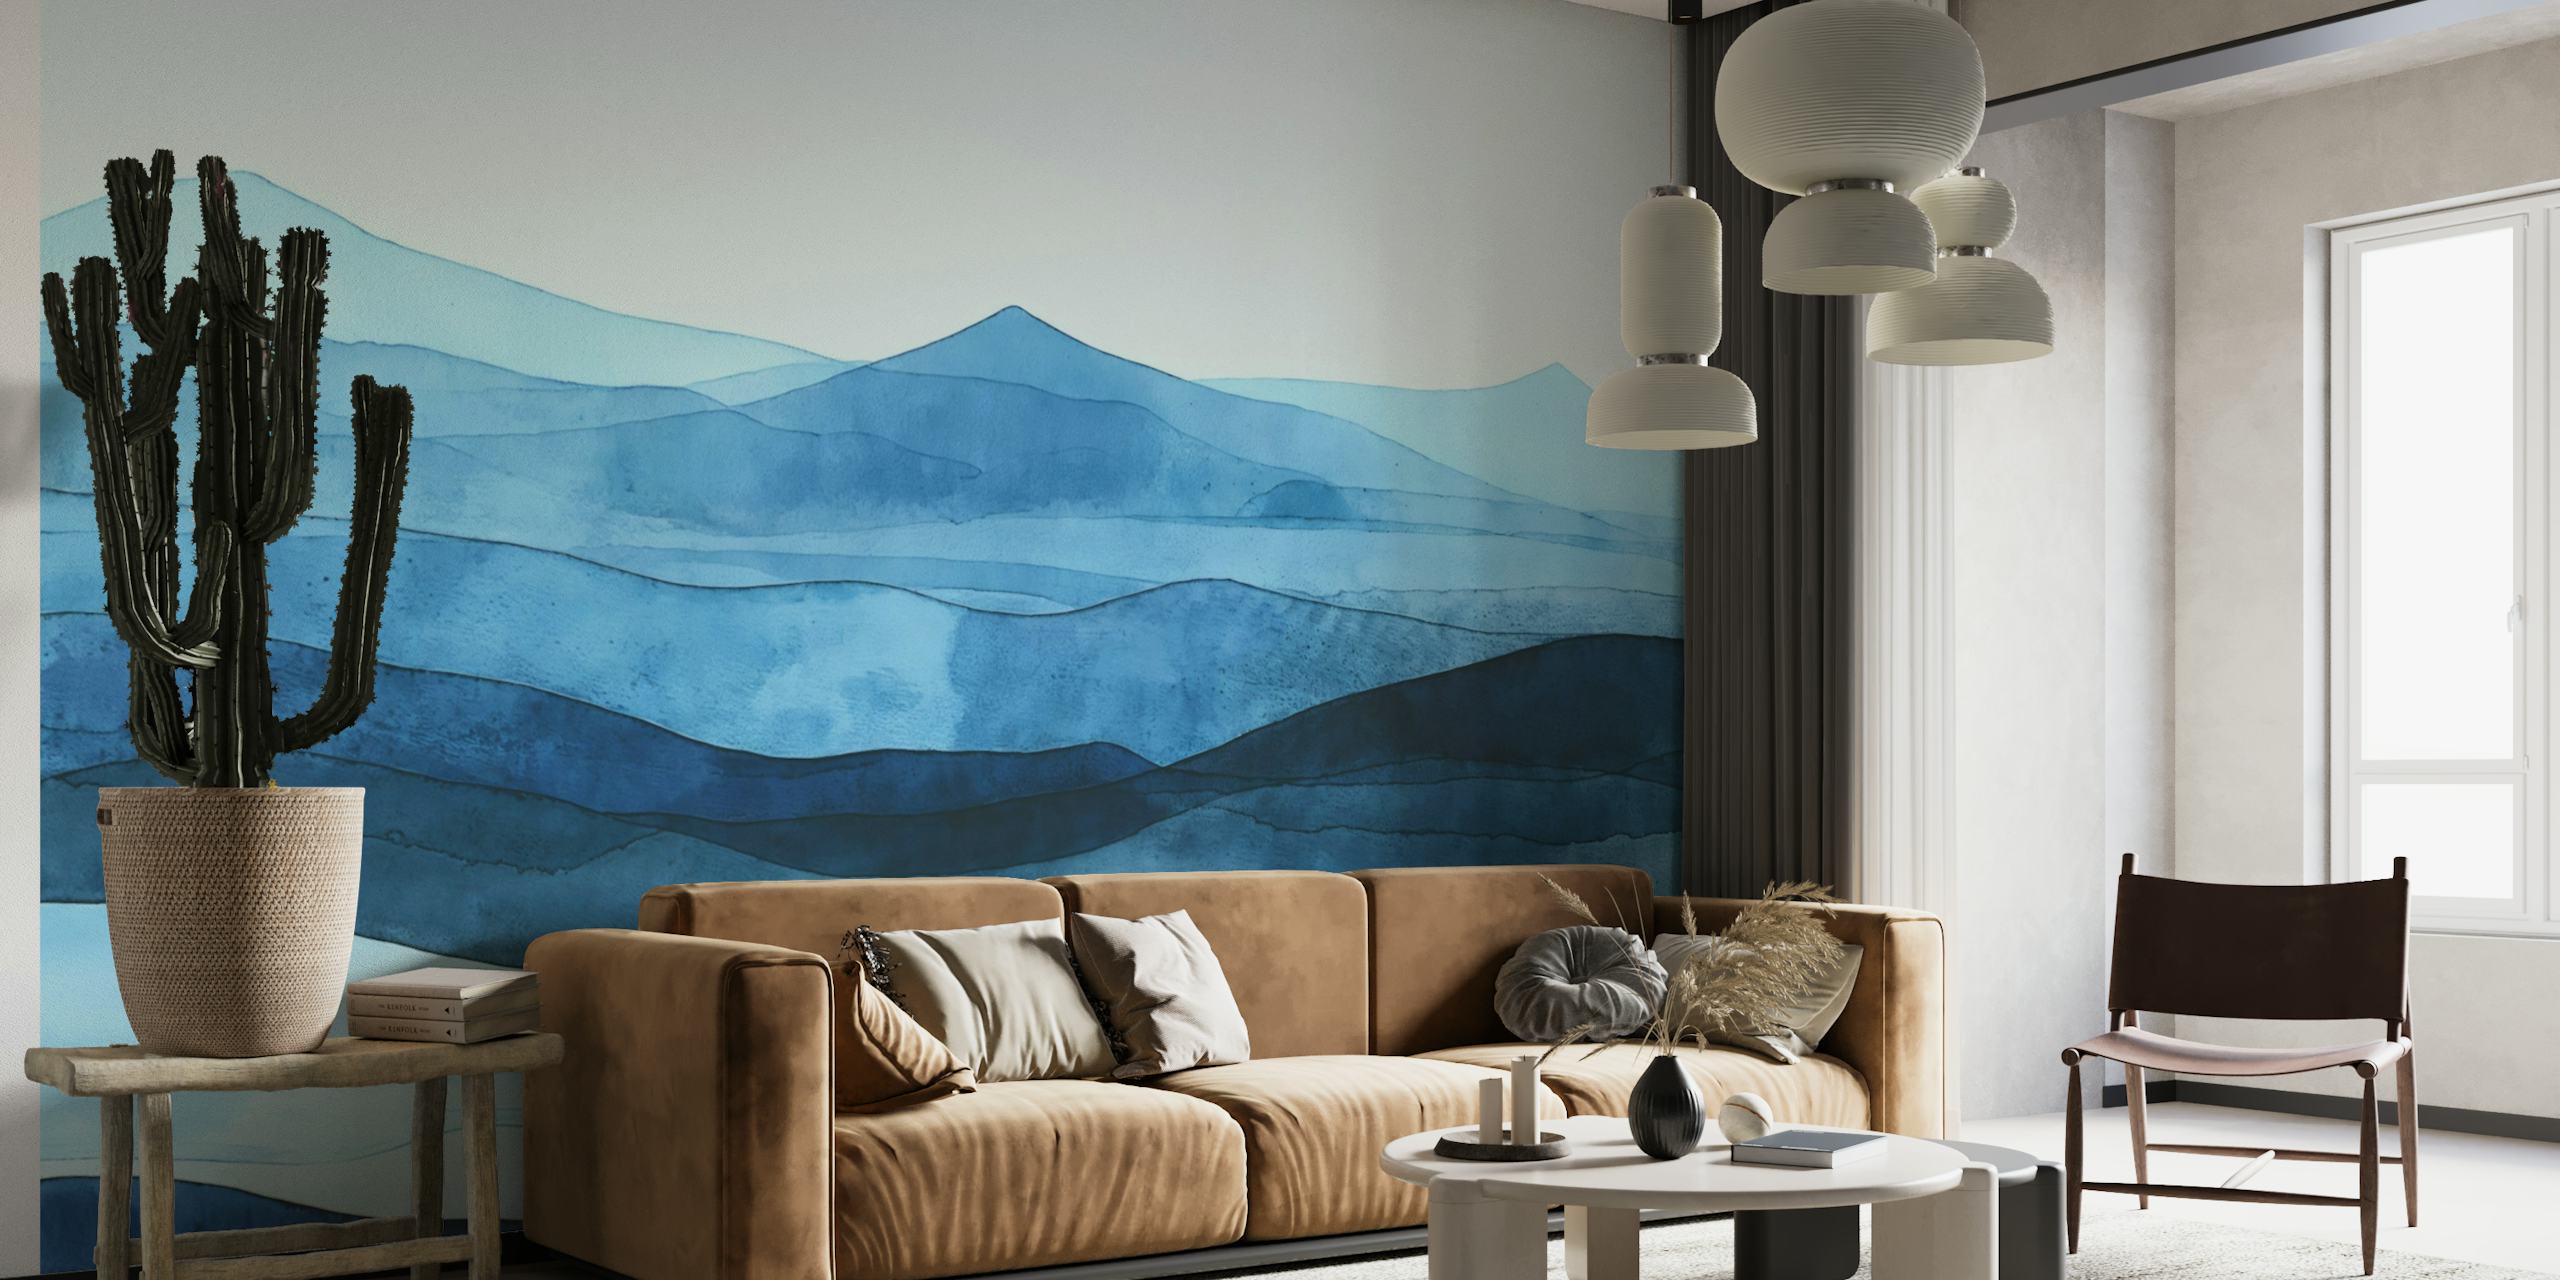 Calm Blue Landscape Watercolor Art wall mural showing peaceful blue mountains and layers